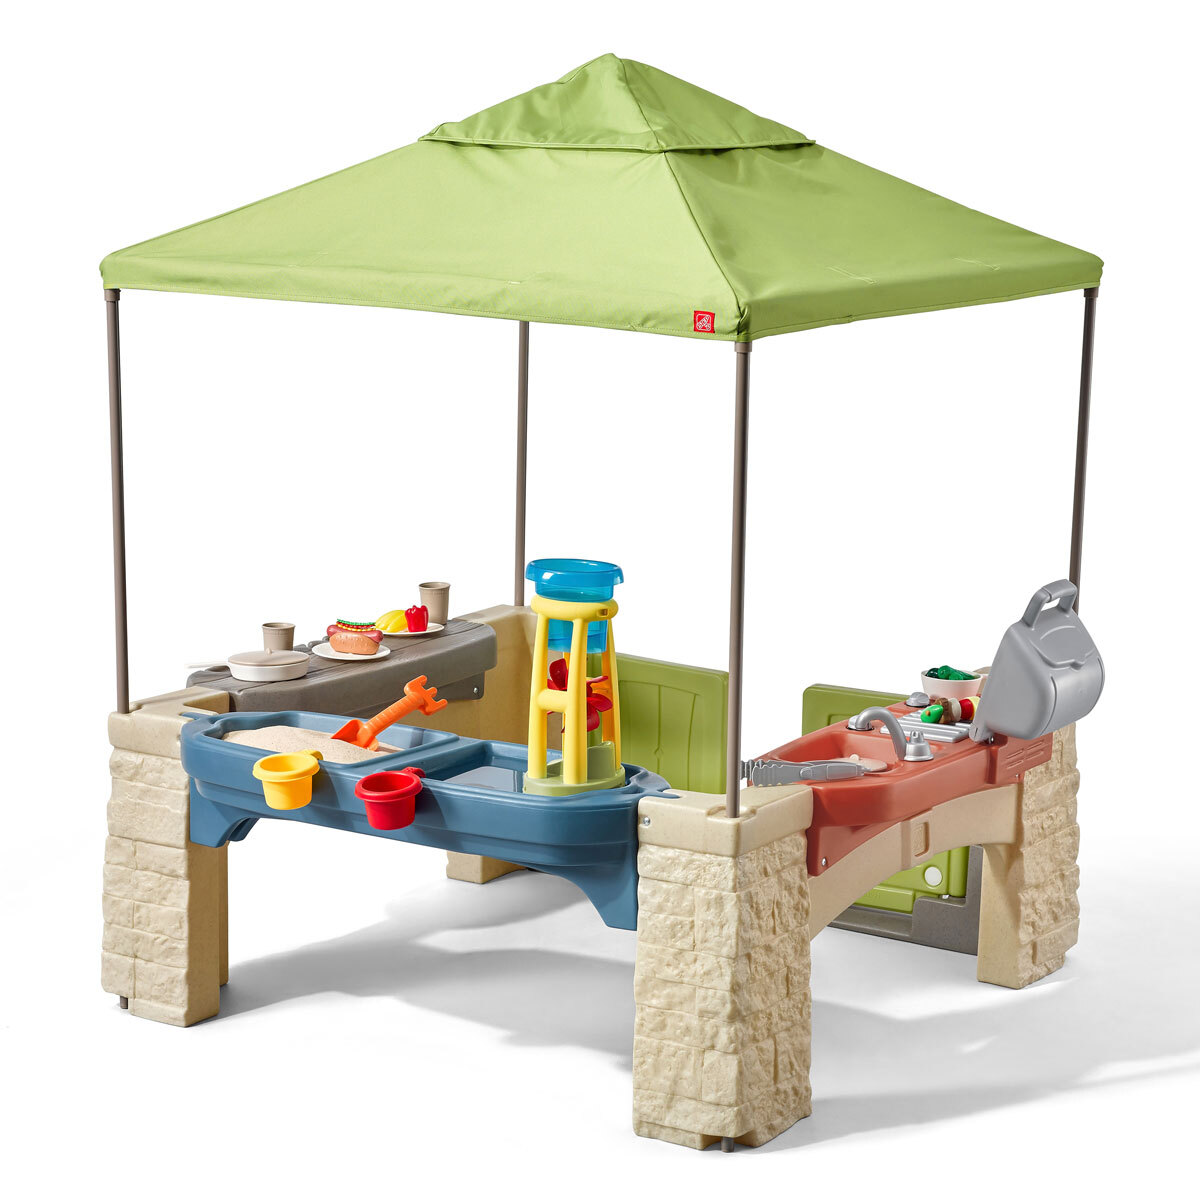 Buy All Around Playtime Patio with Canopy Features2 Image at Costco.co.uk